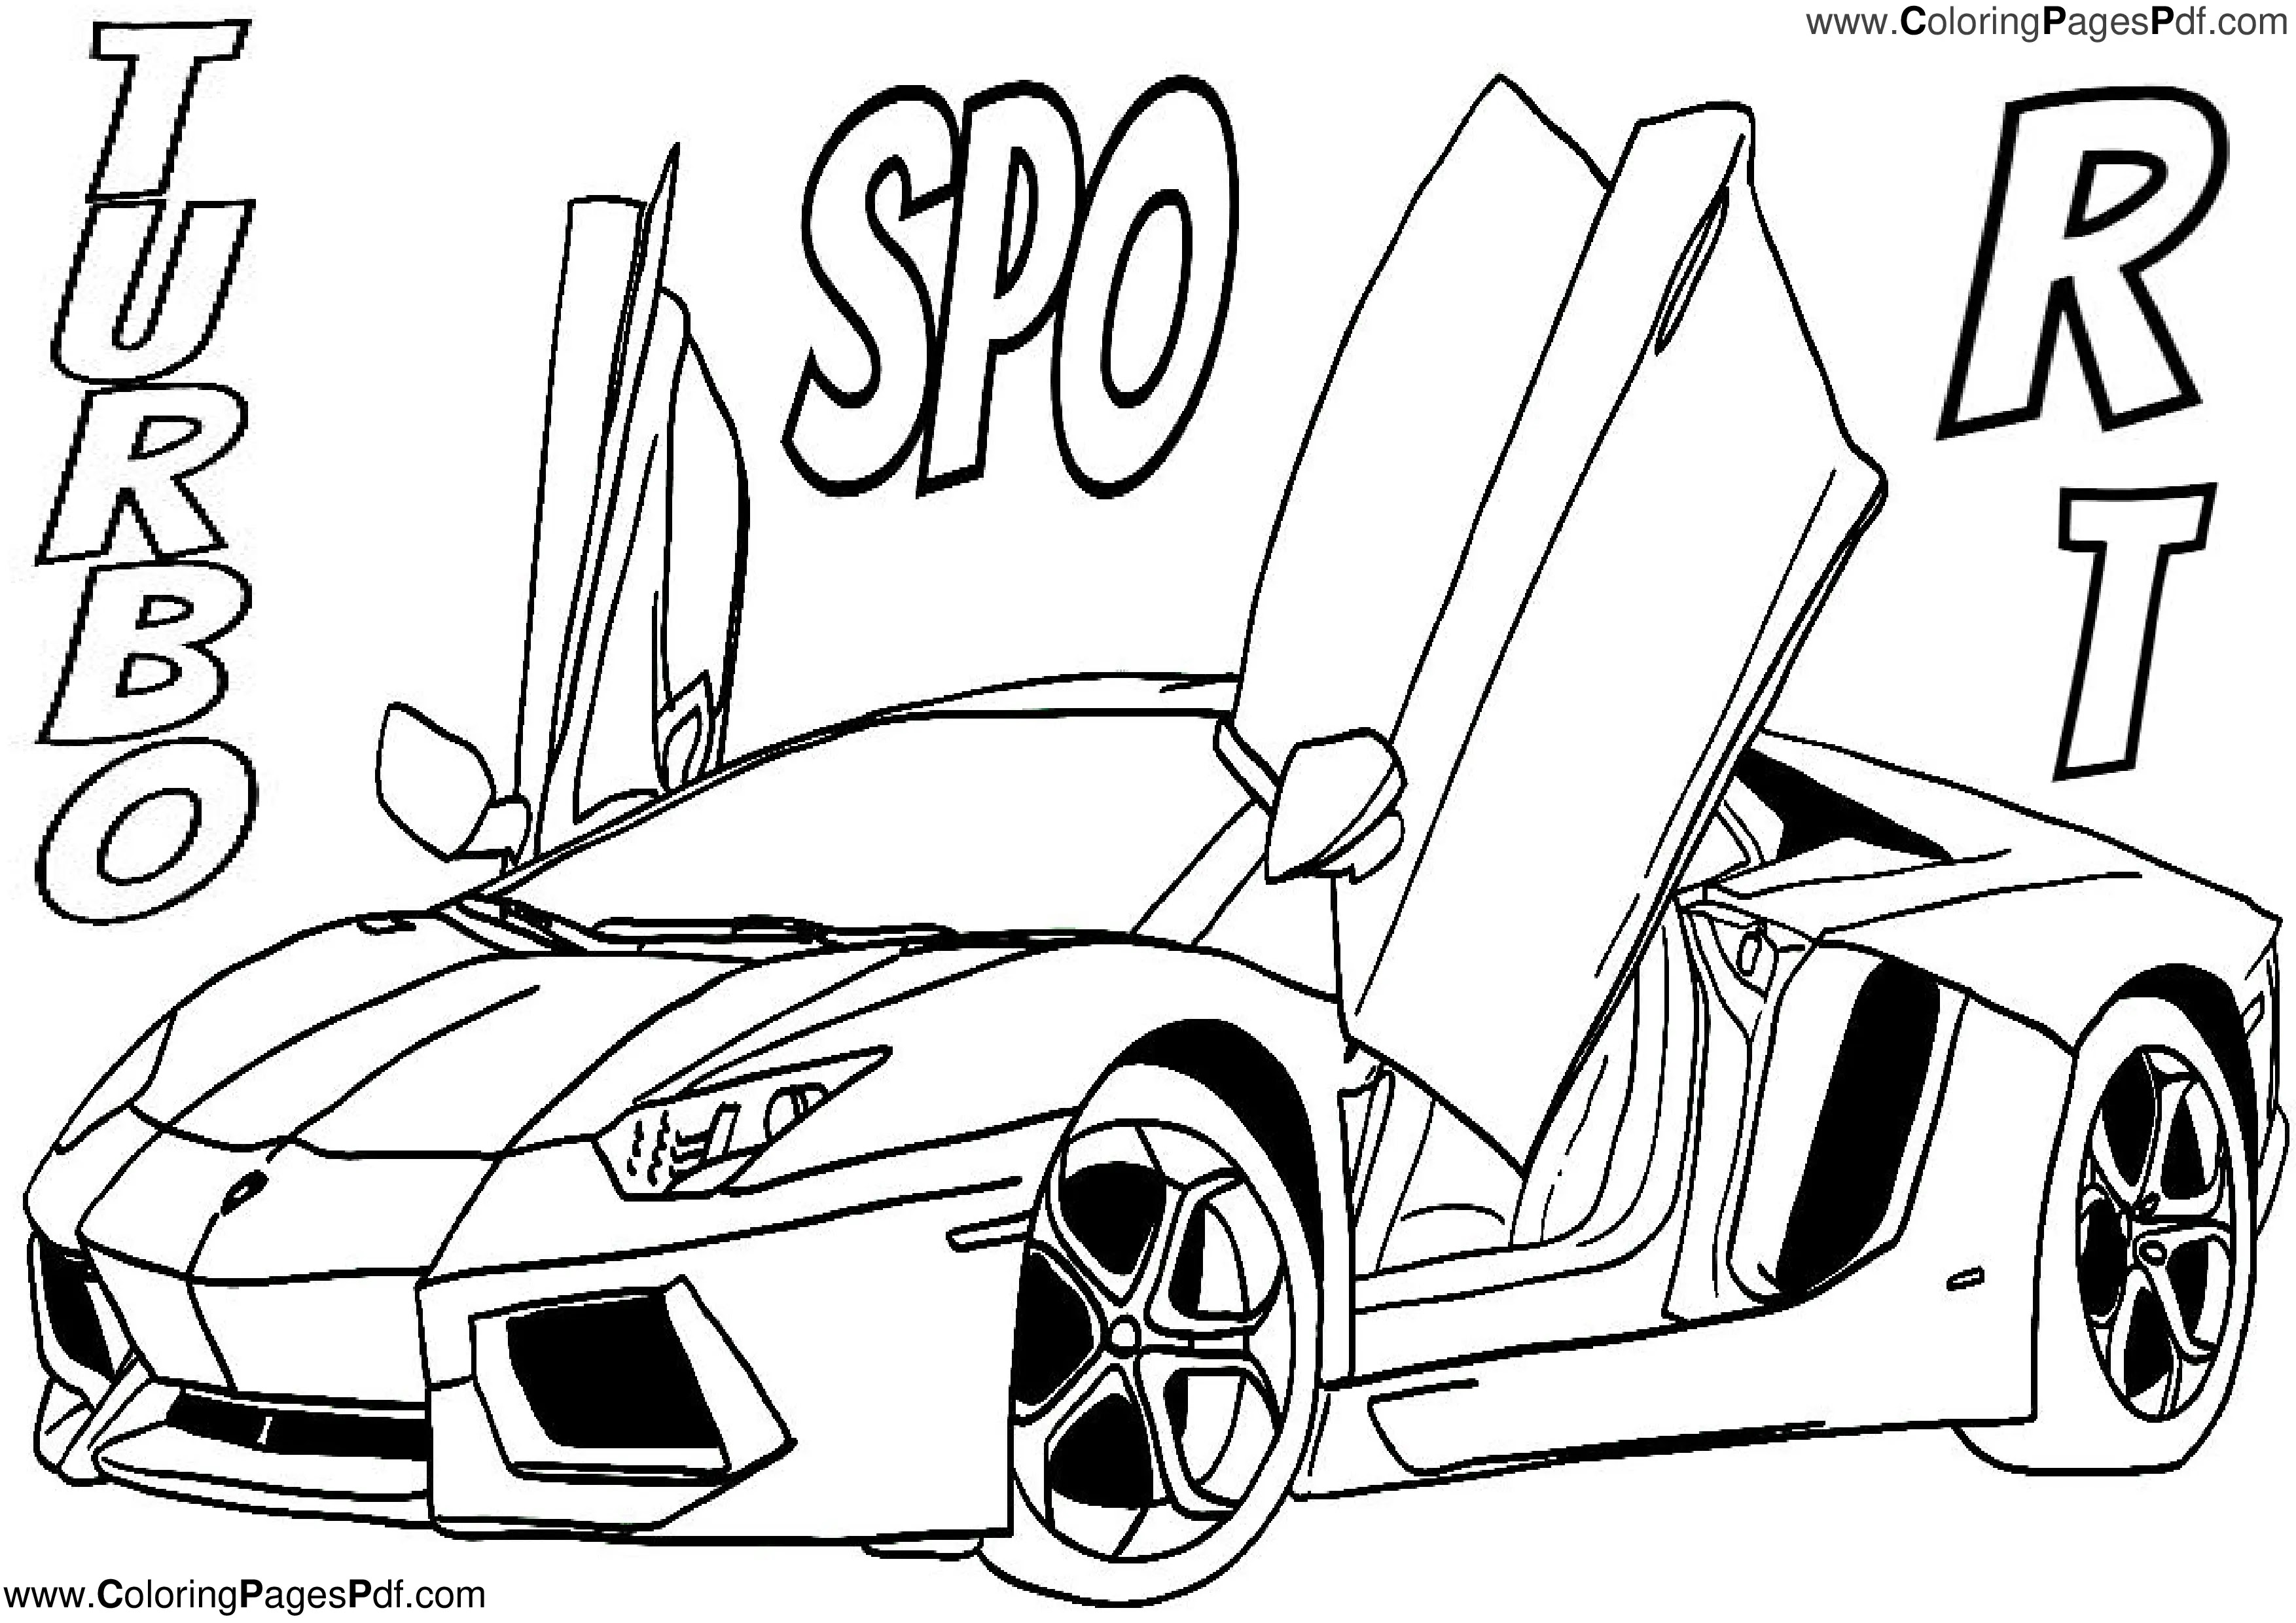 Sports car coloring pages